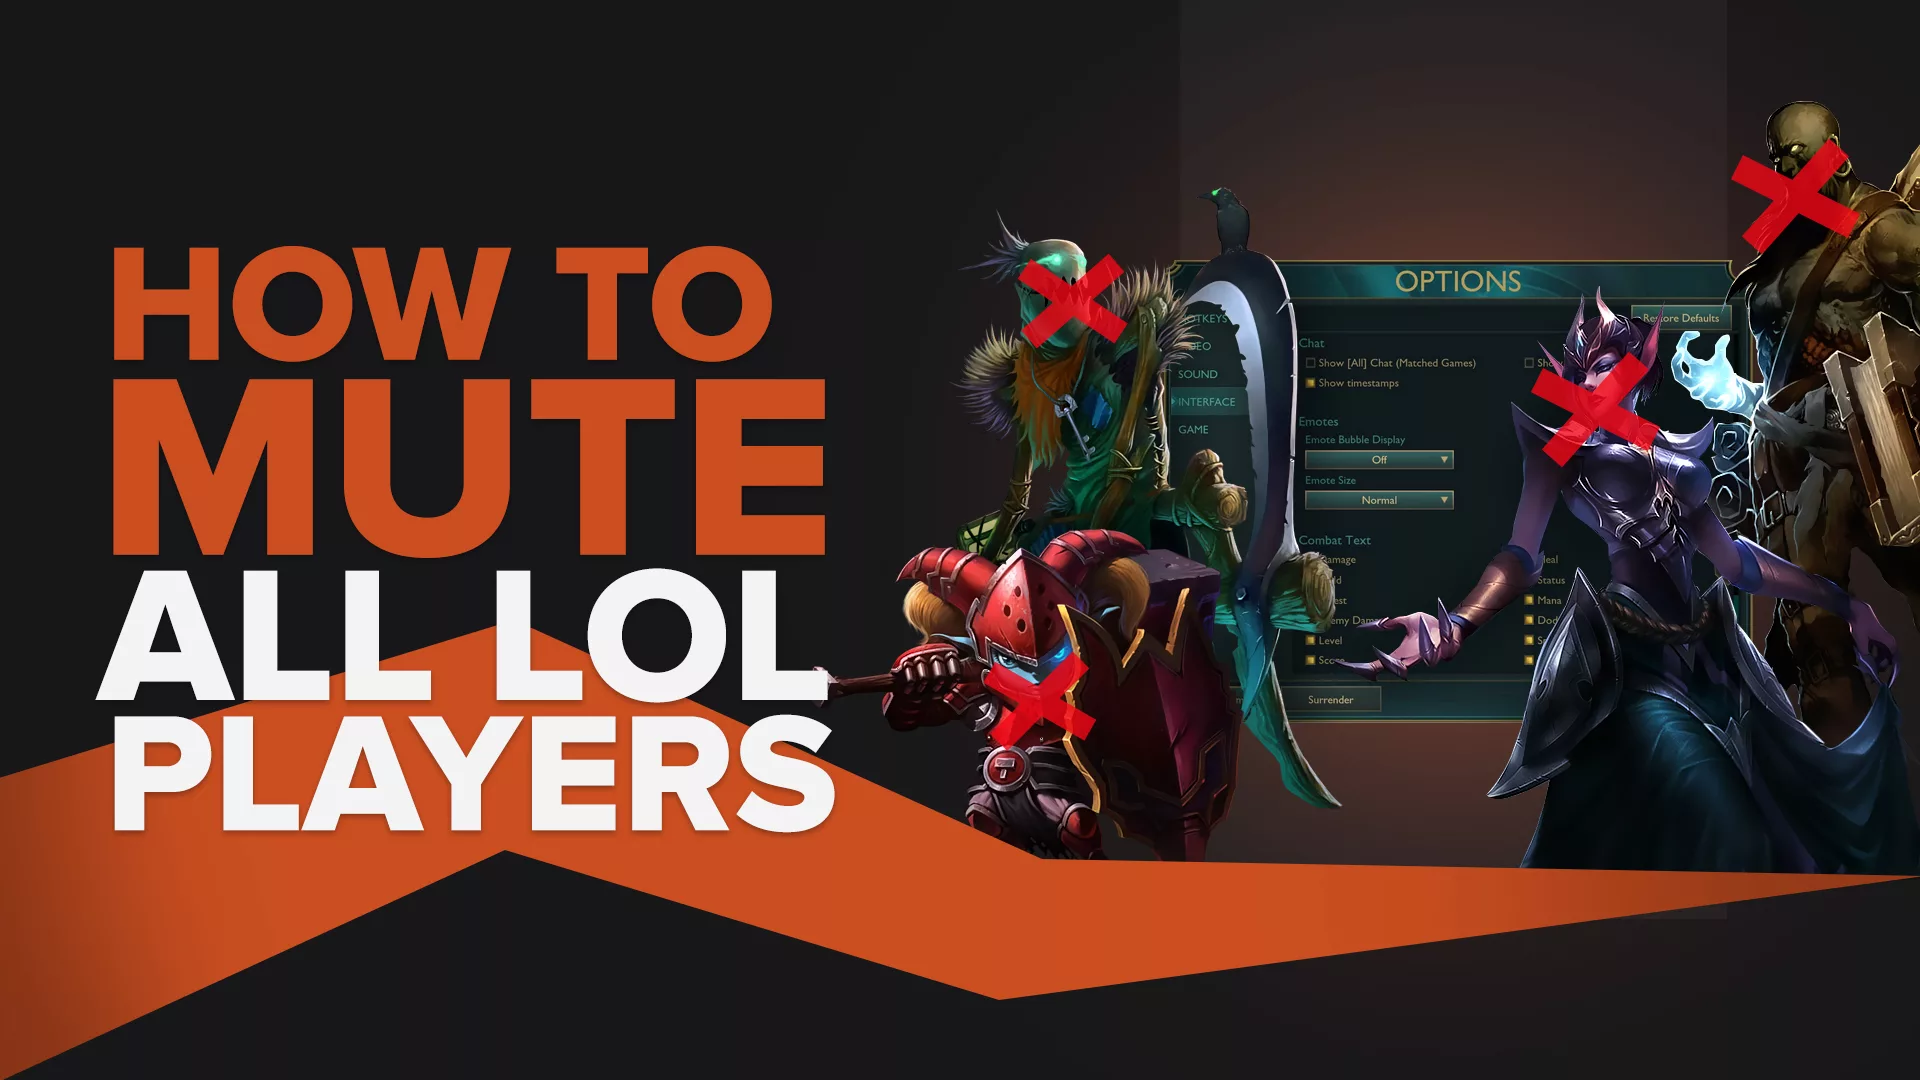 How to Mute All LoL Players